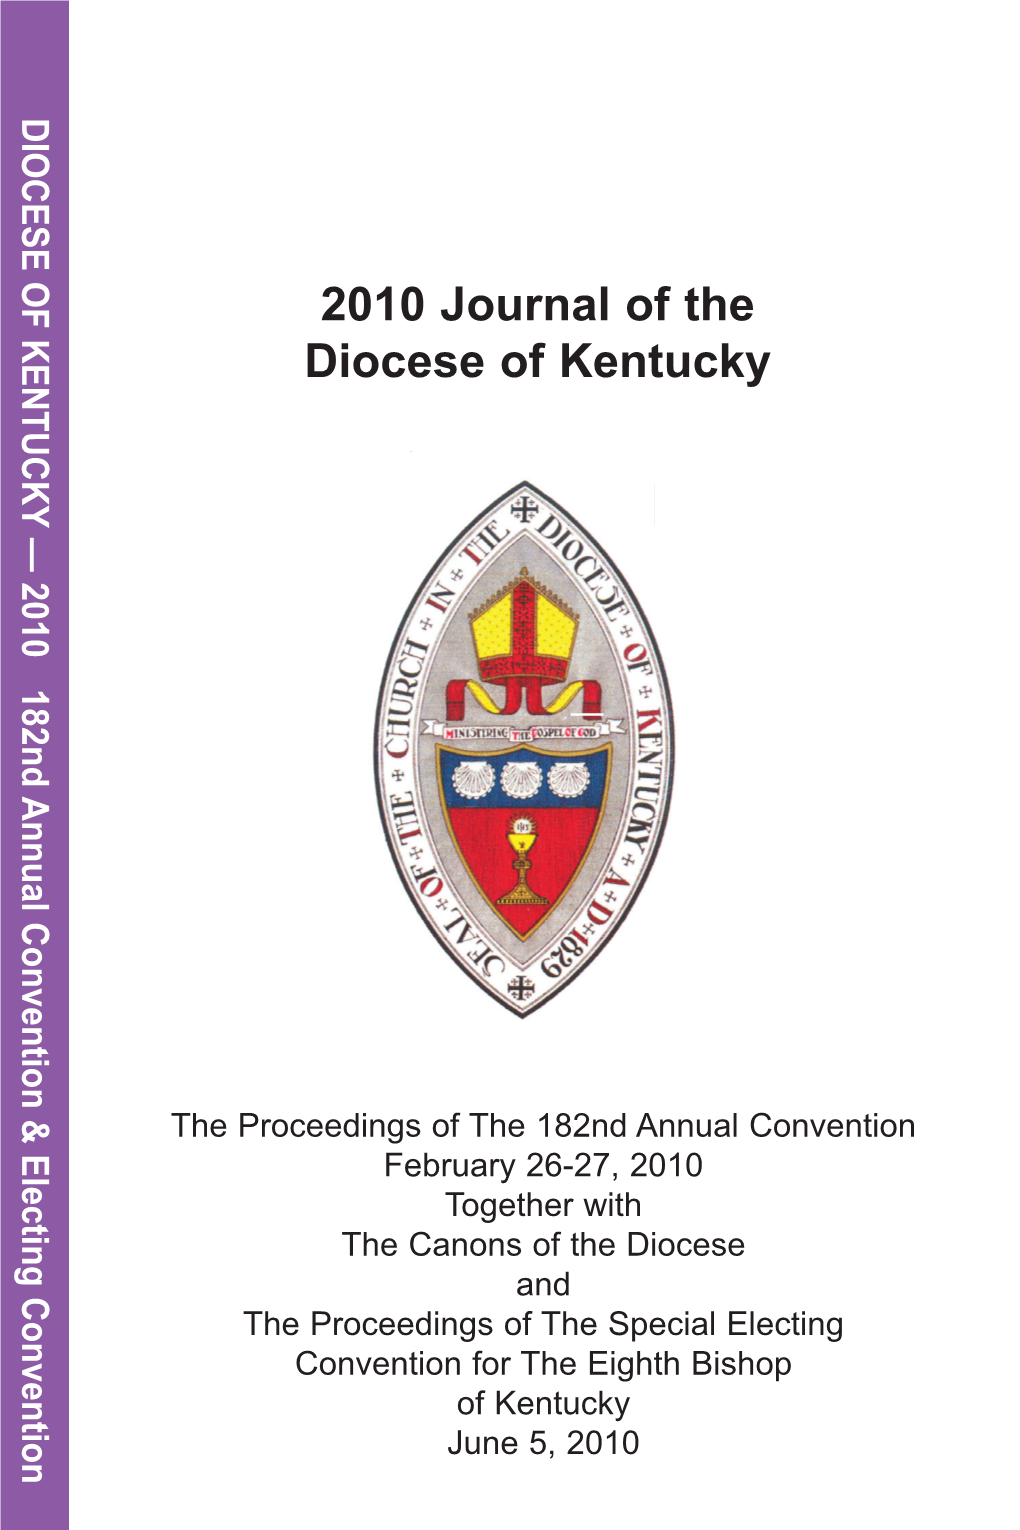 2010 Journal of the Diocese of Kentucky